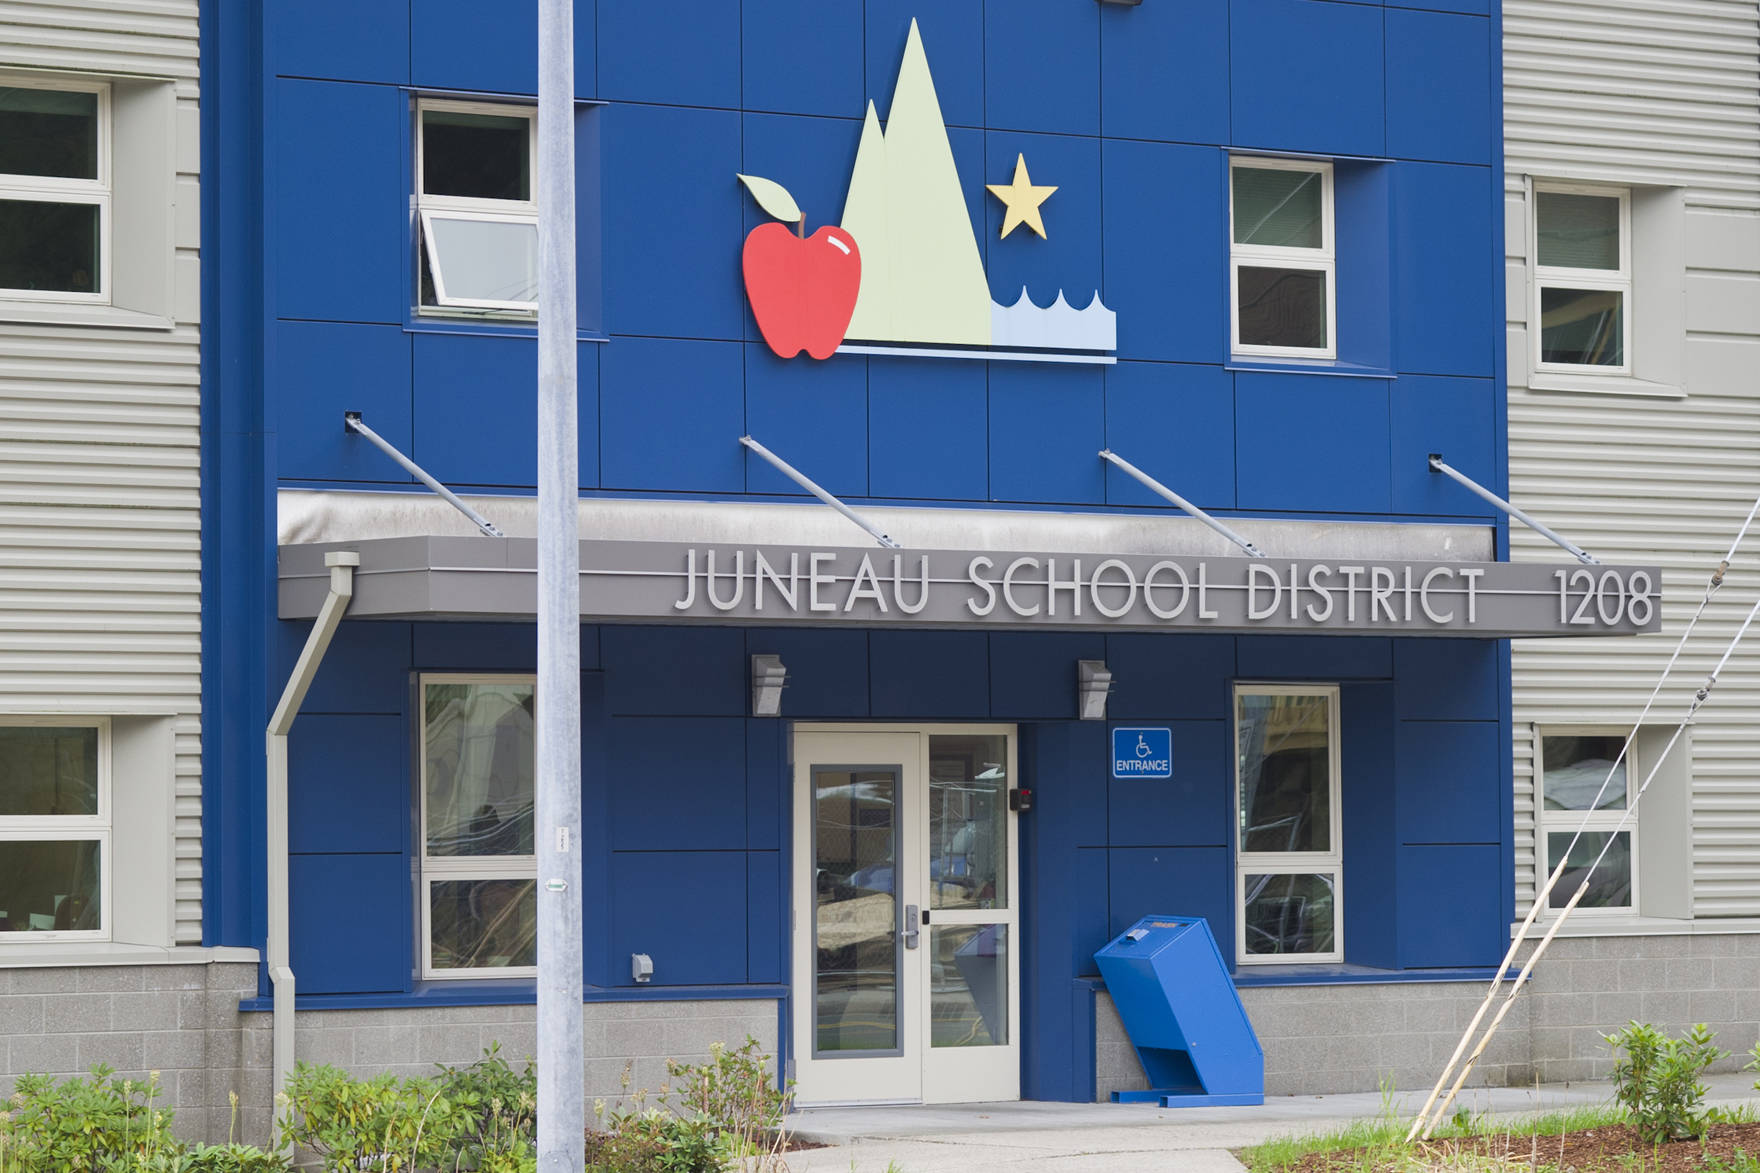 Here’s how Dunleavy’s proposed education cuts would affect Juneau schools